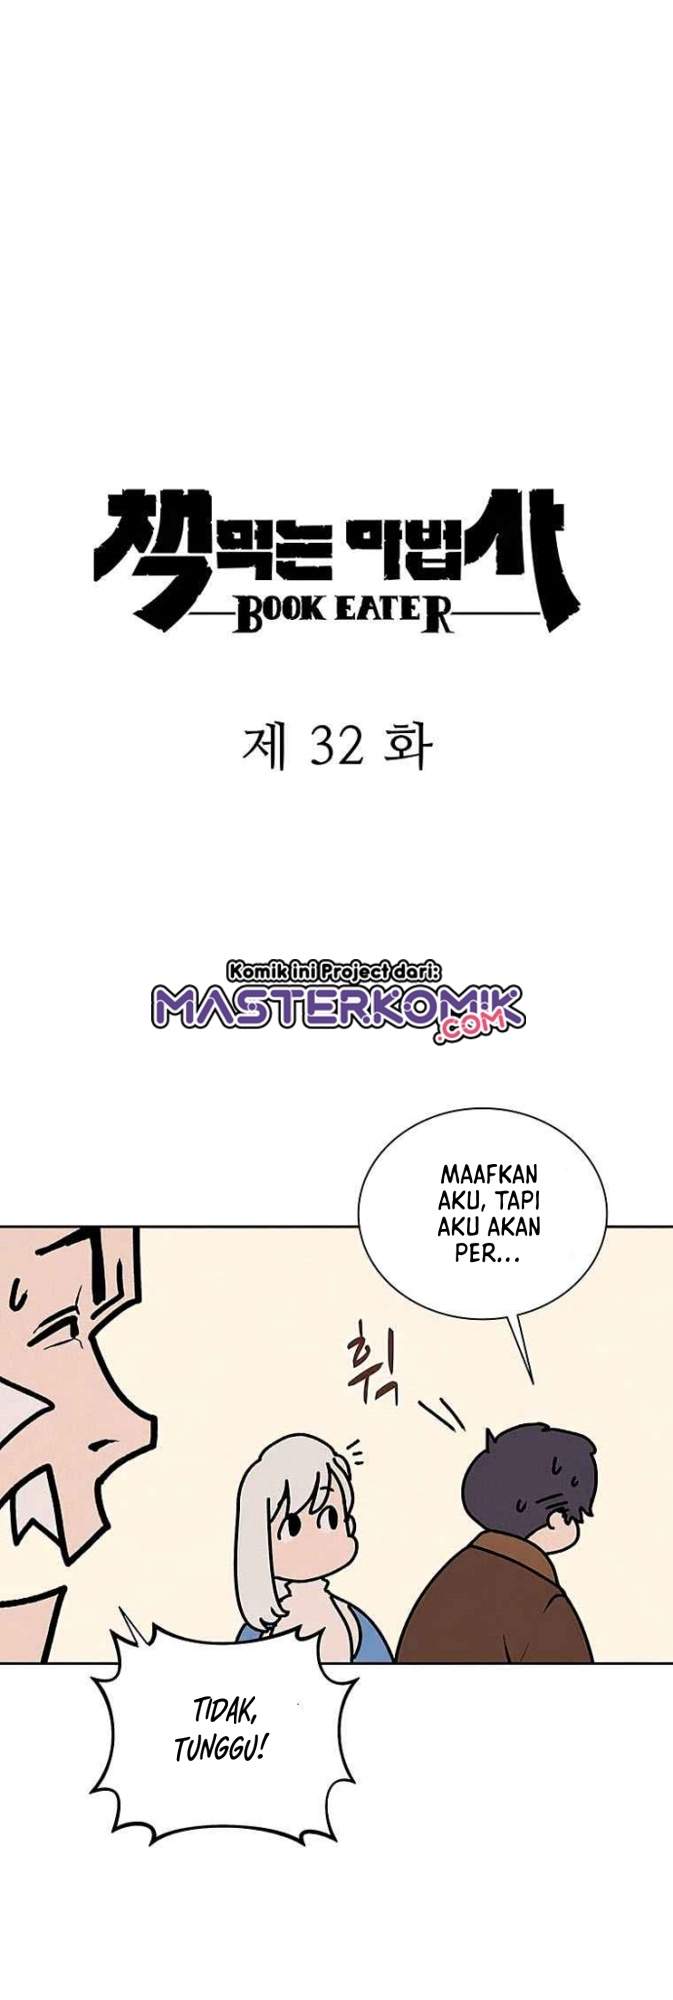 The Book Eating Magician (Book Eater) Chapter 32